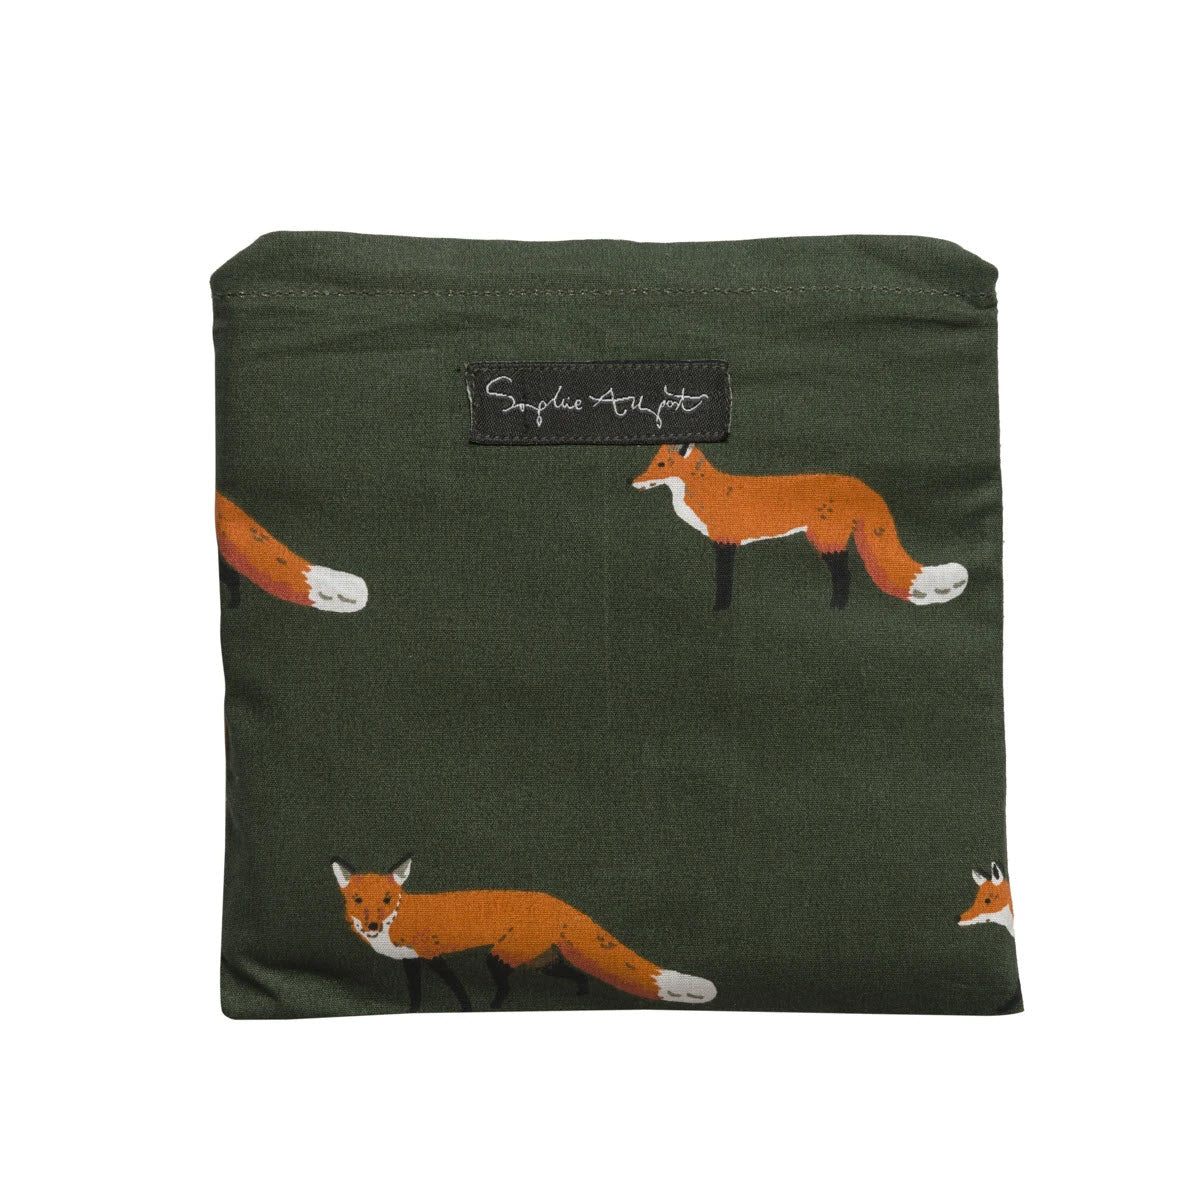 Forest green fabric pouch with copper Sophie Allport foxes print design.